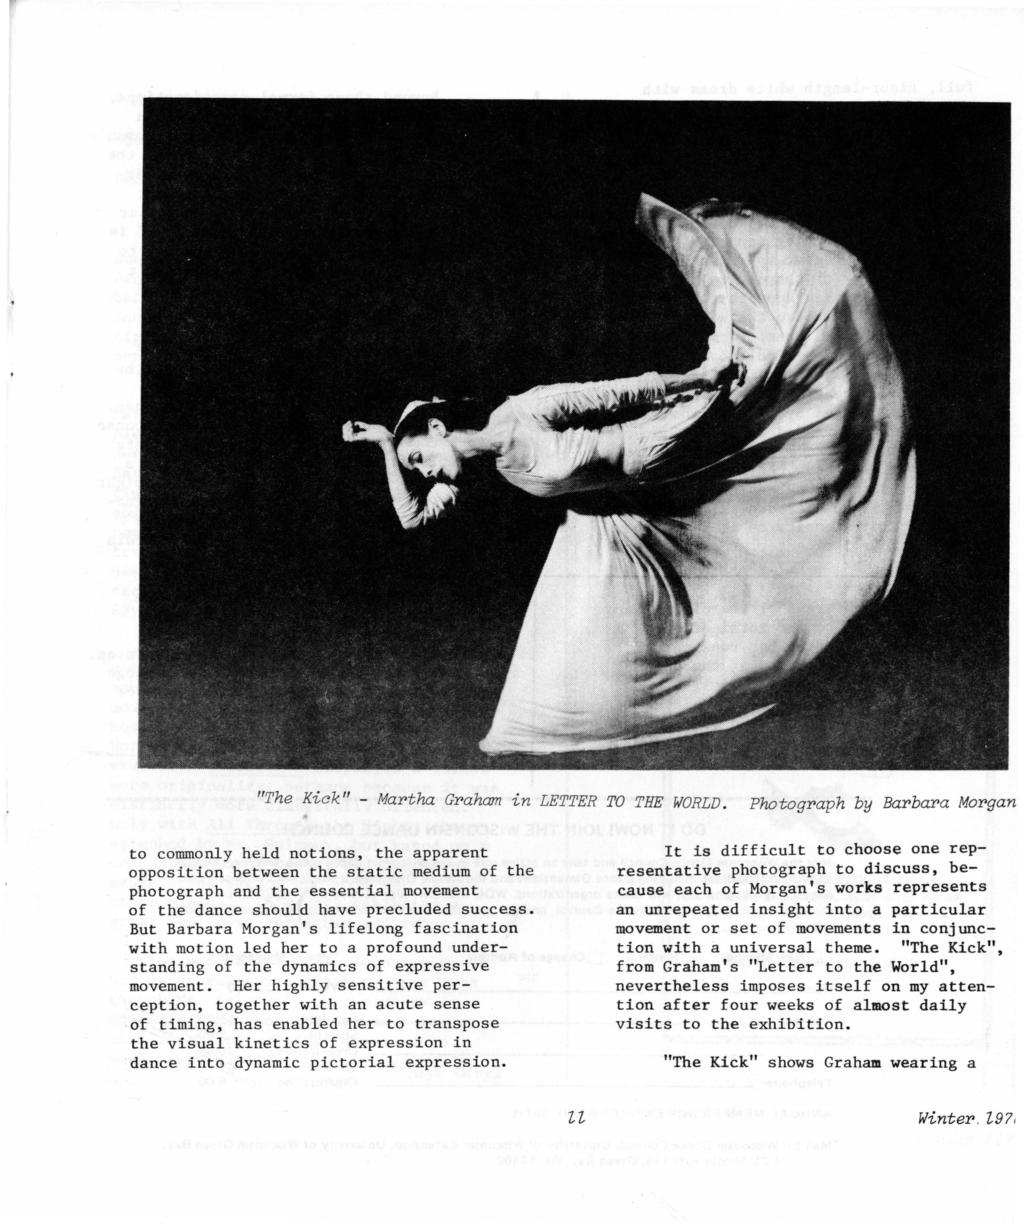 "The Kick " - Martha Graham in LETTER TO THE WORLD.